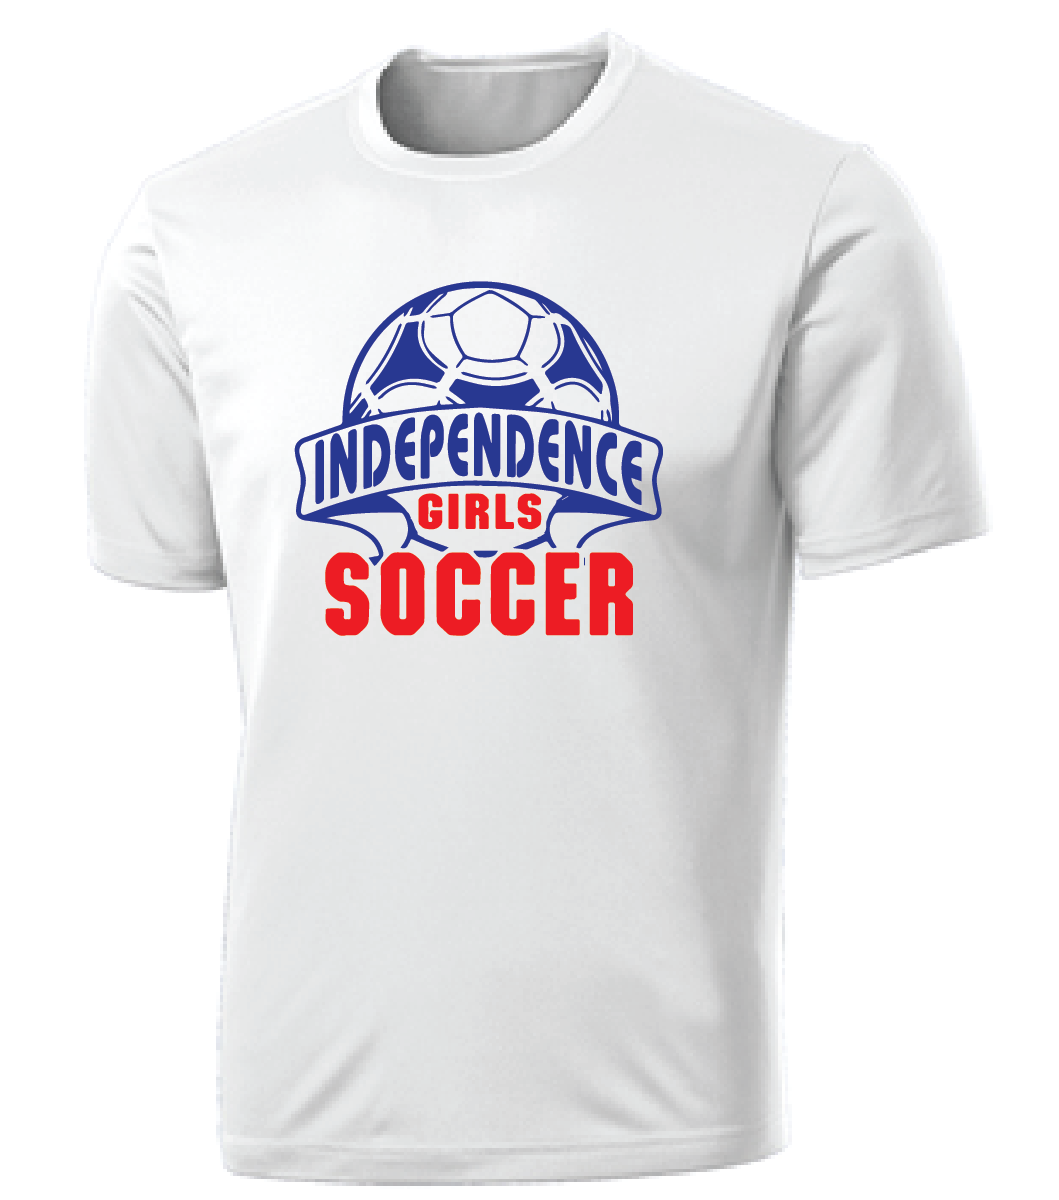 Performance T-Shirt / White / Independence Middle Girls Soccer